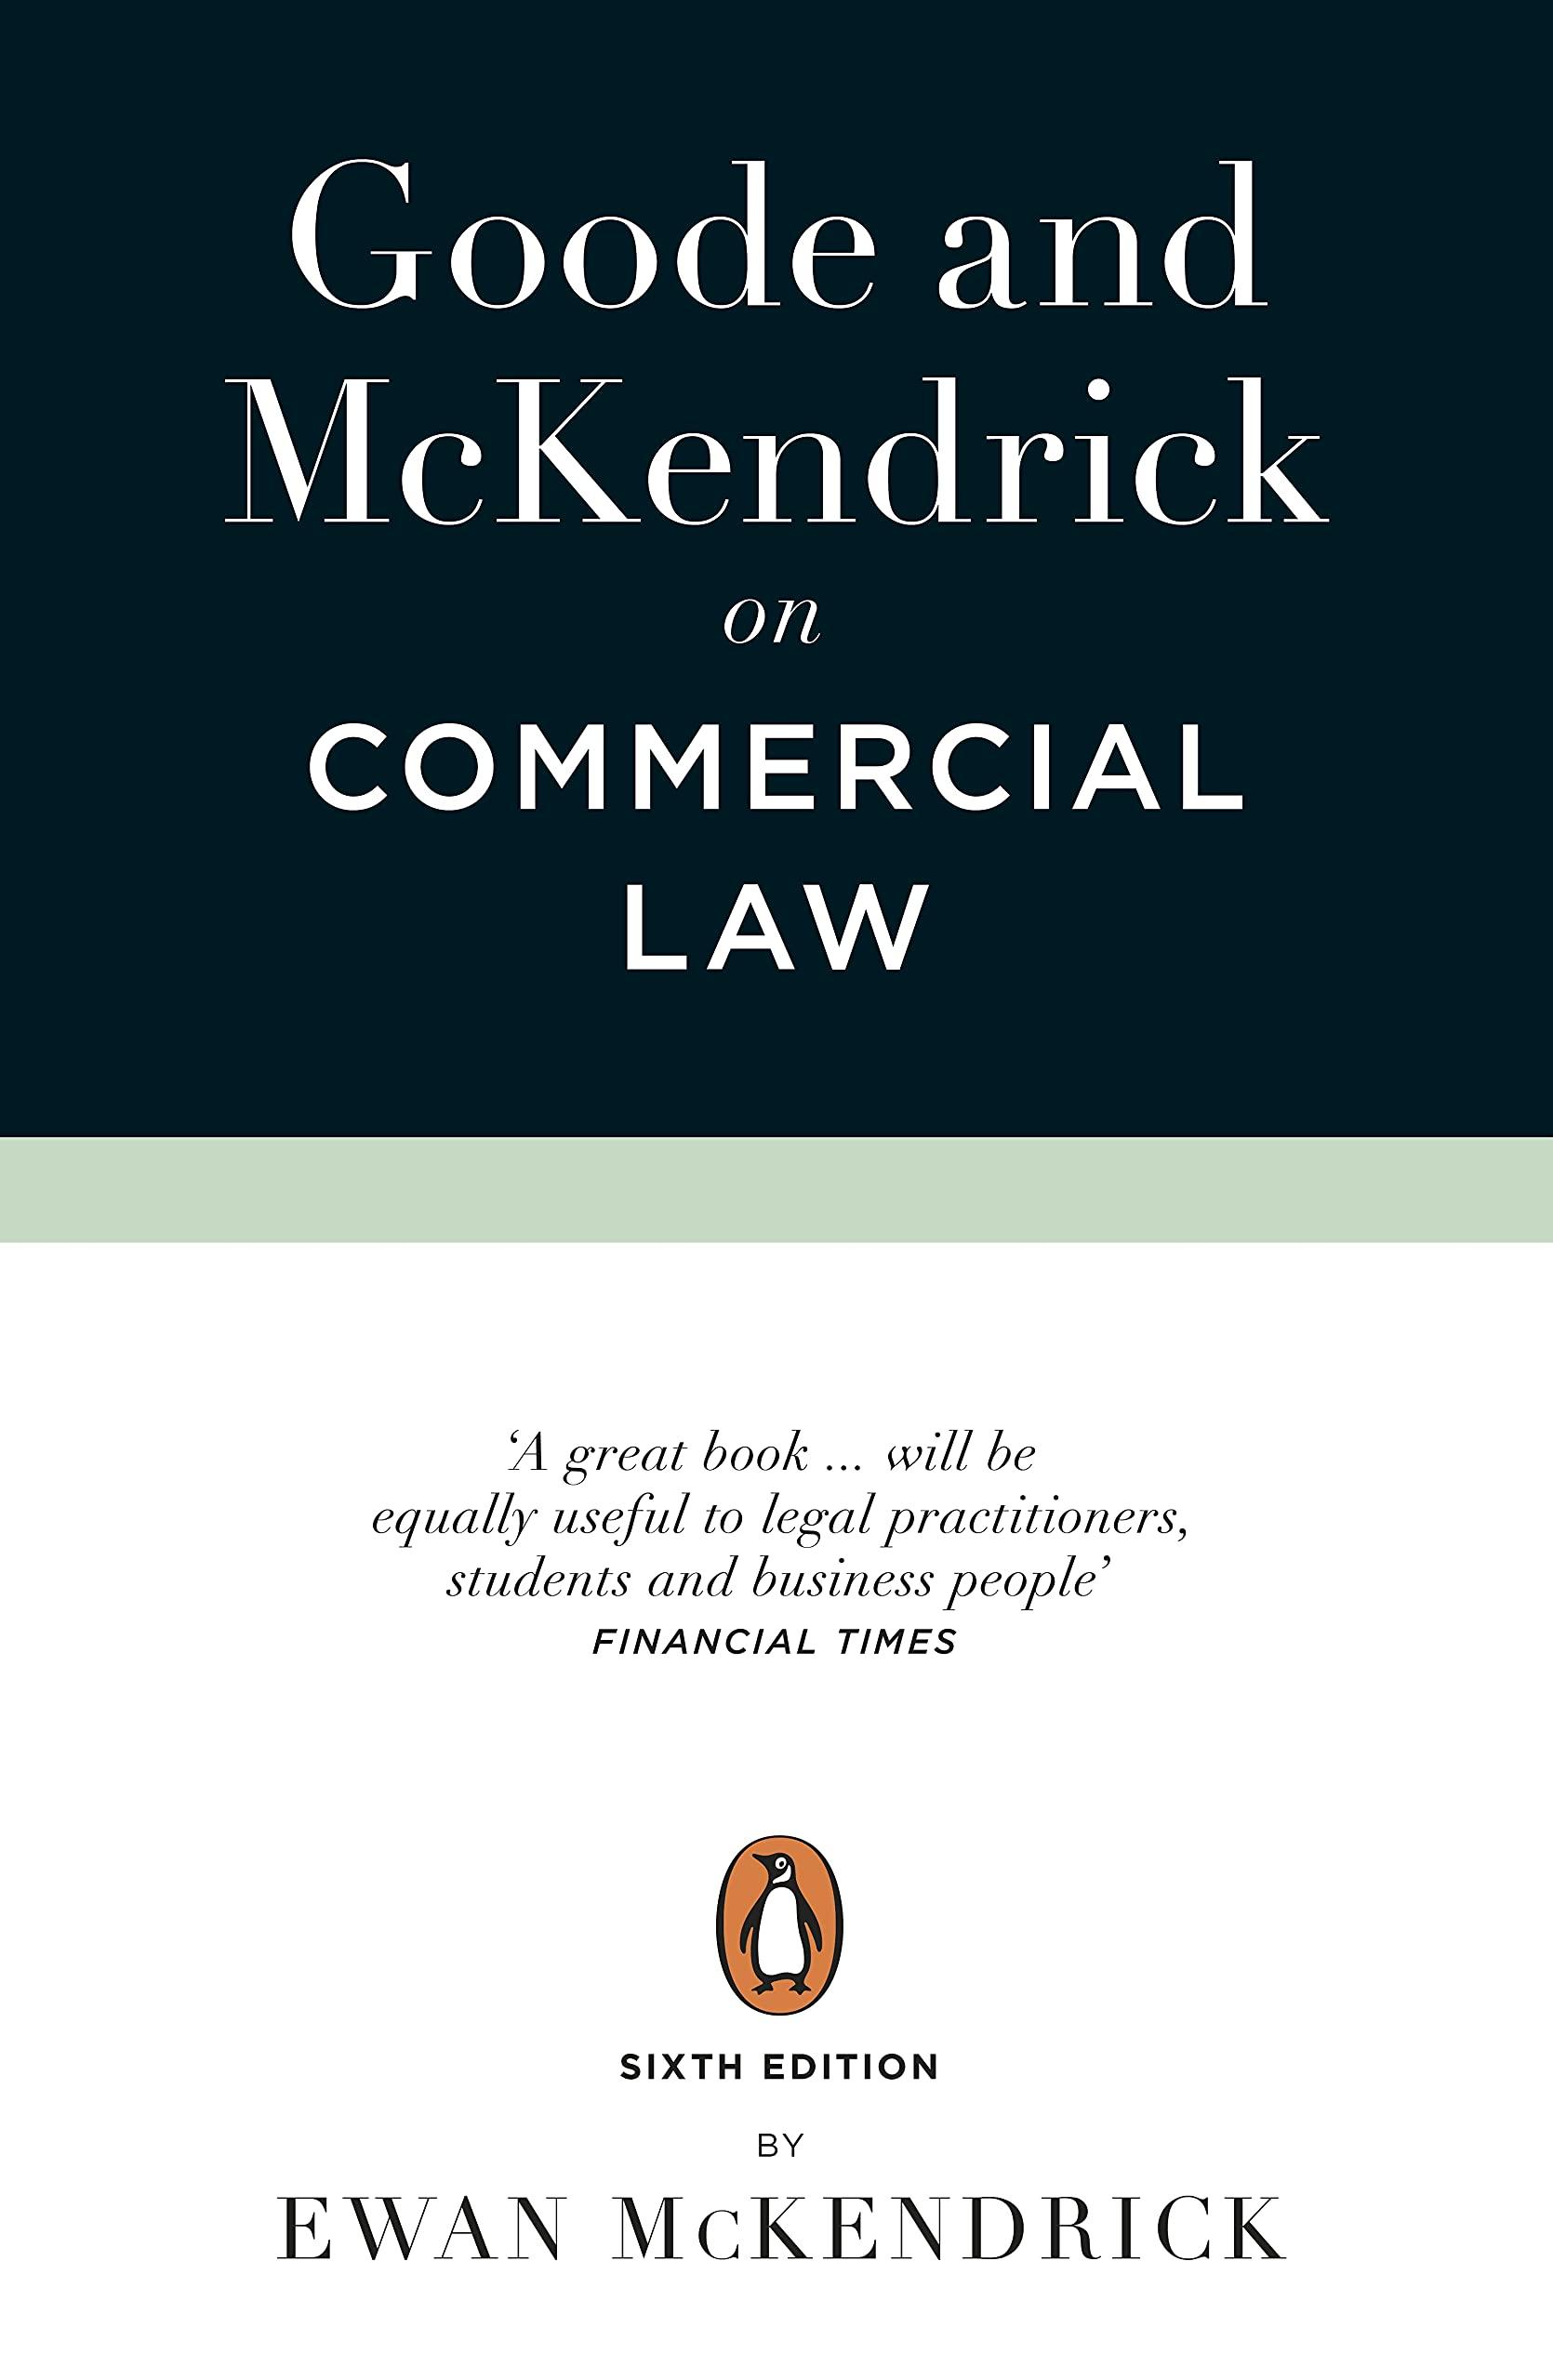 goode and mckendrick on commercial law 6th edition roy goode, ewan mckendrick 0141991887, 978-0141991887